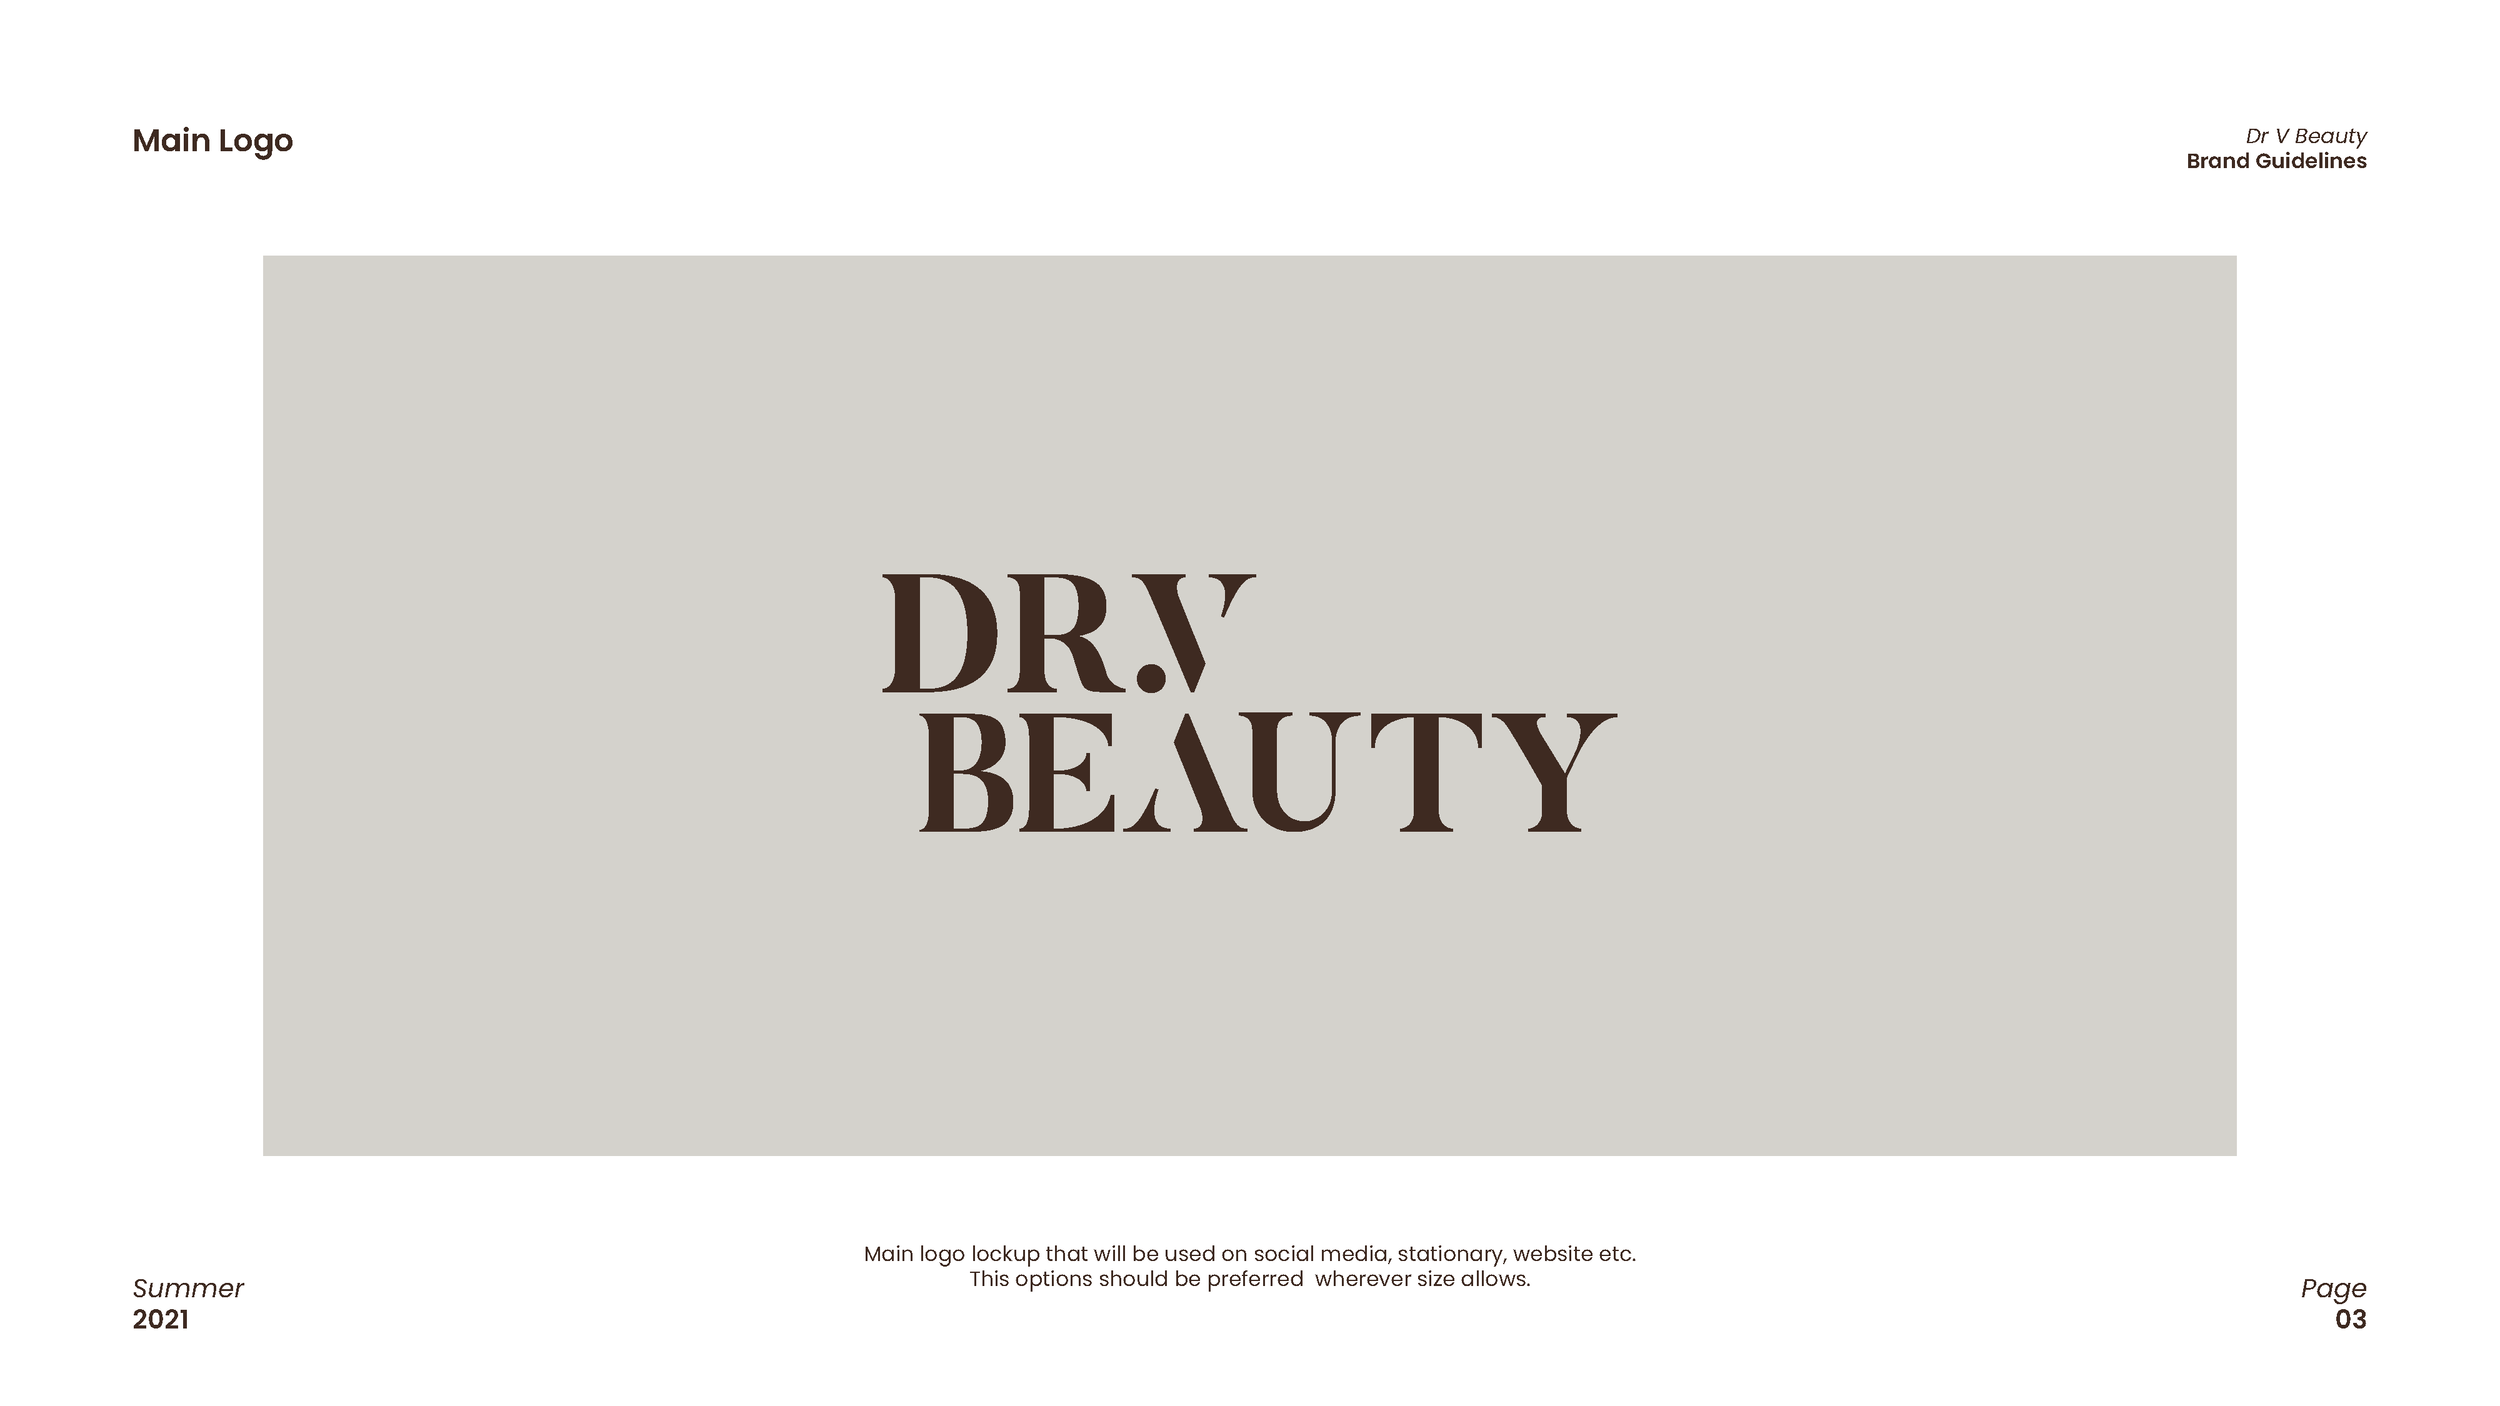 Dr V Beauty - Brand Guidelines_Page_03.png